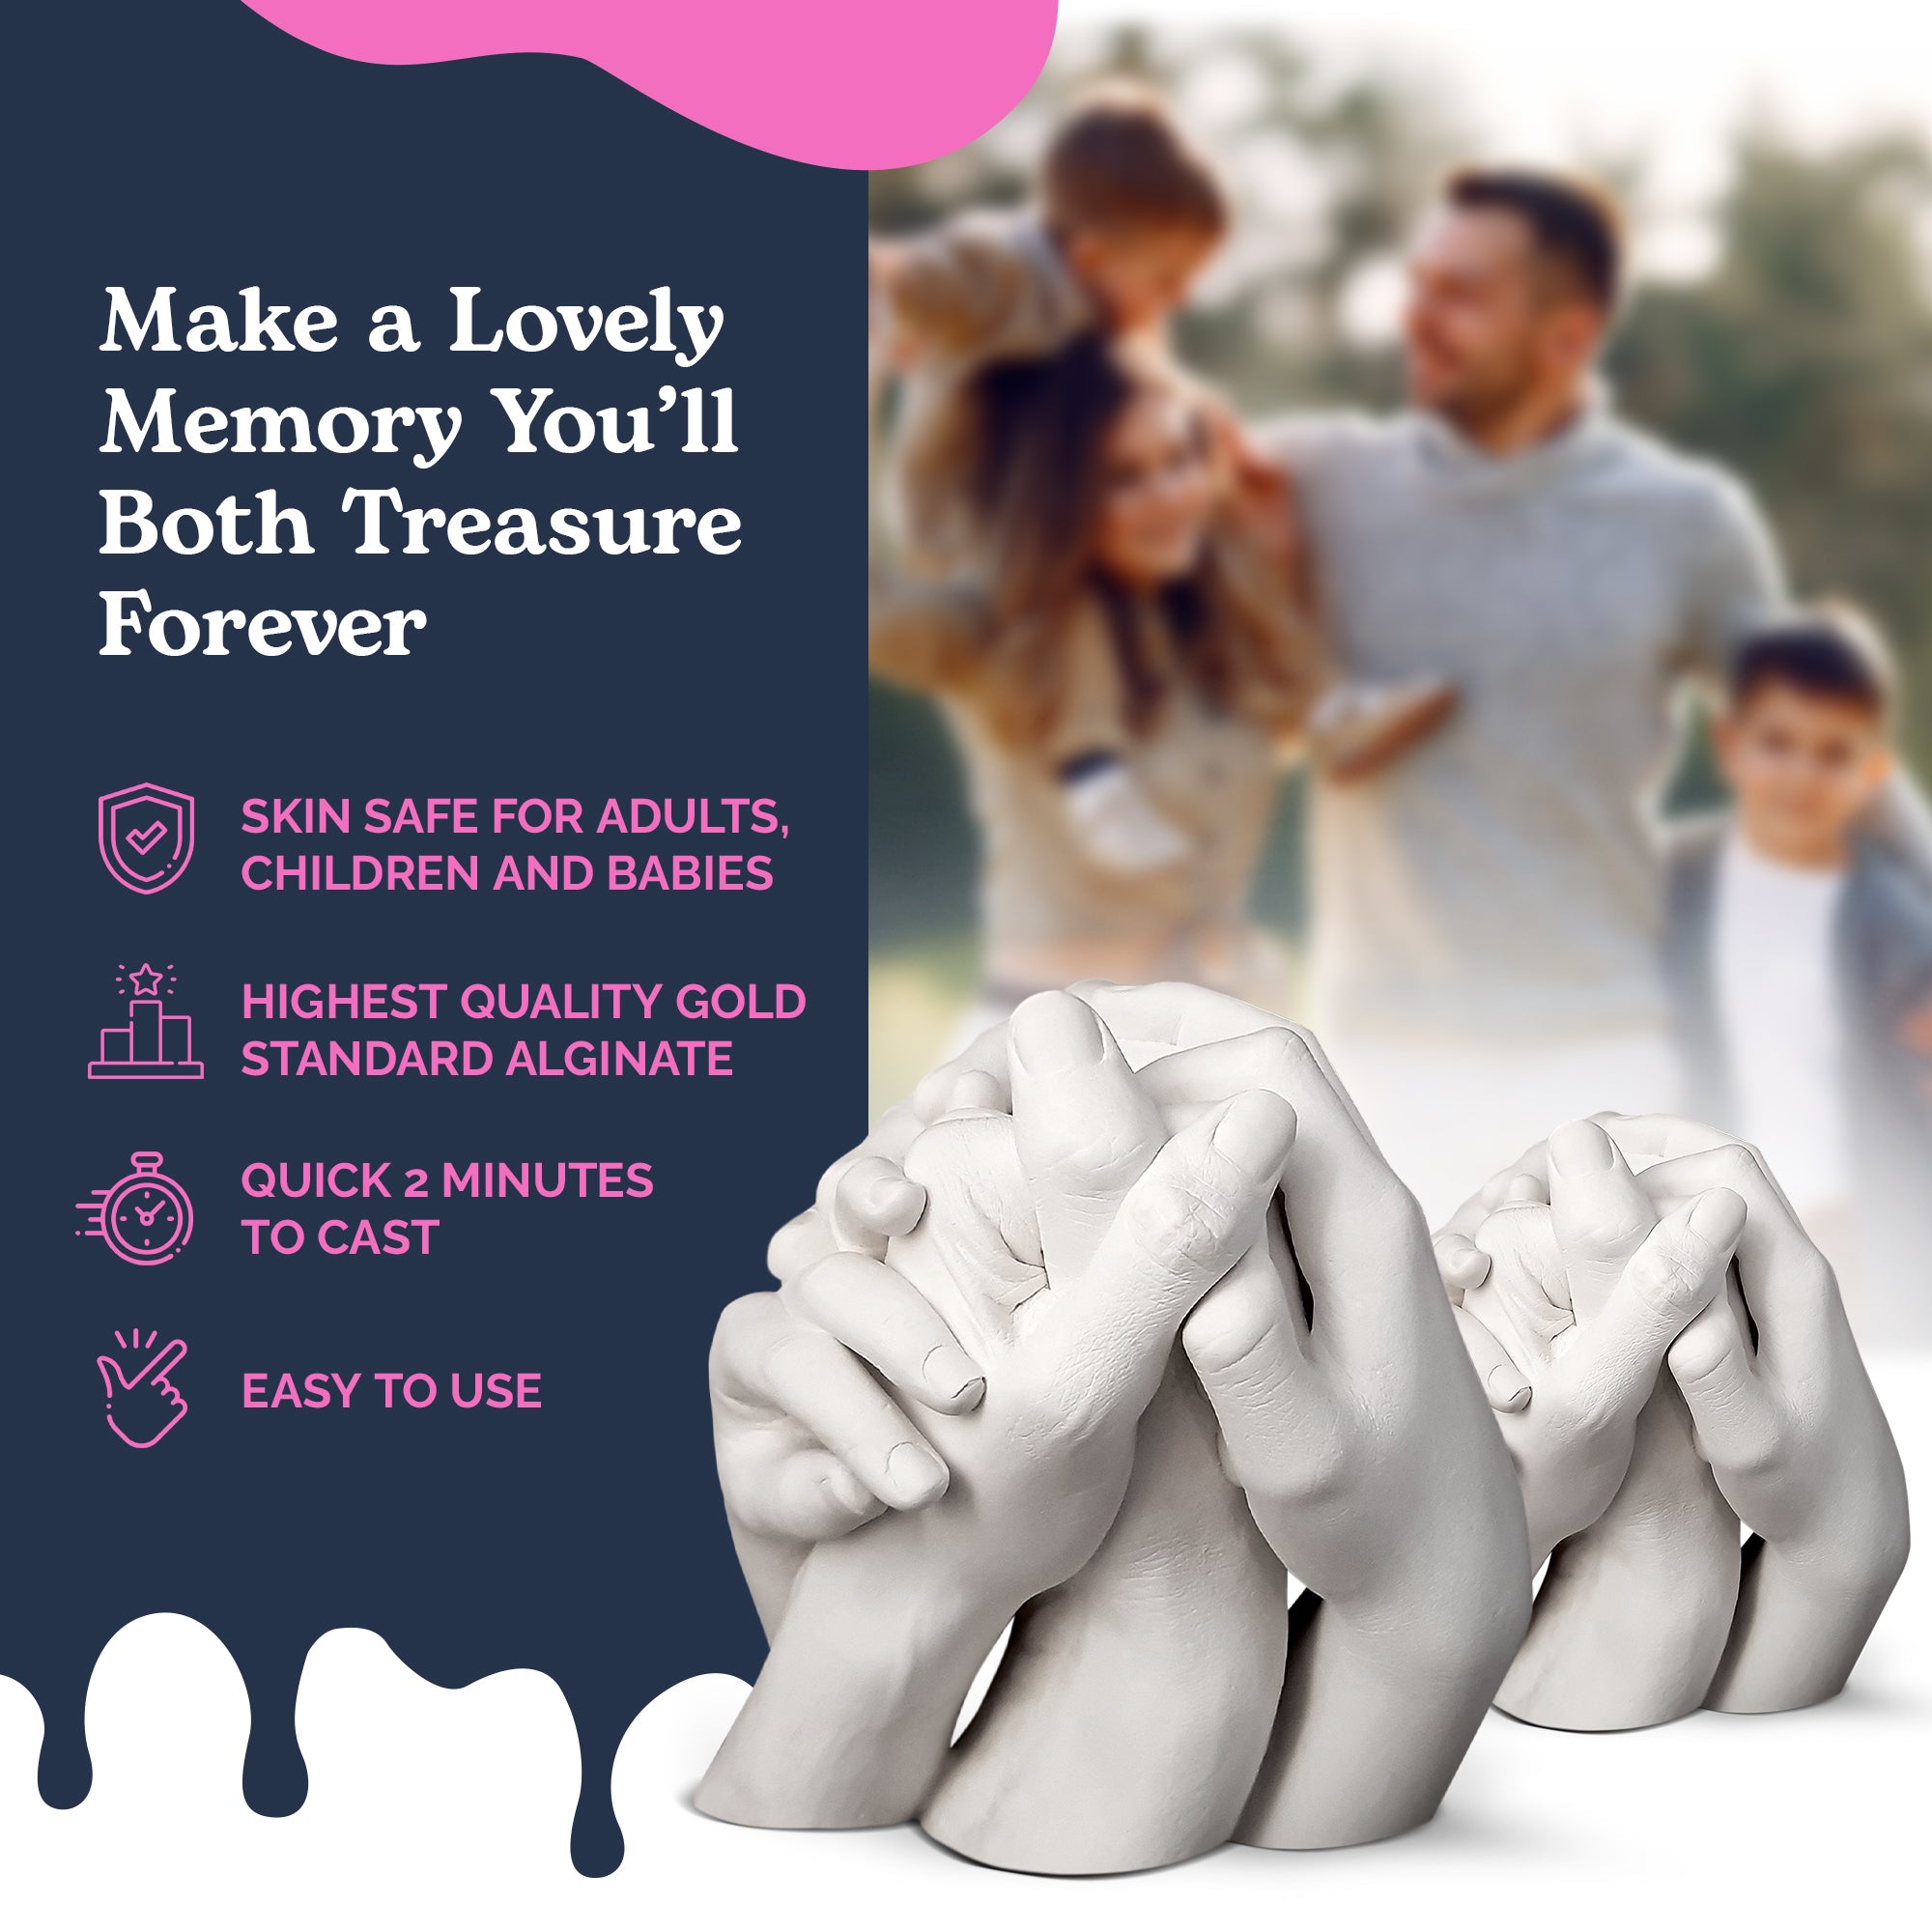 Edinburgh Family Hand Casting Kit for 4 - Premium DIY Hand Hold Statue Kit for Mothers Day, Valentines, Family or Pregnancy Gift, Baby Shower, or